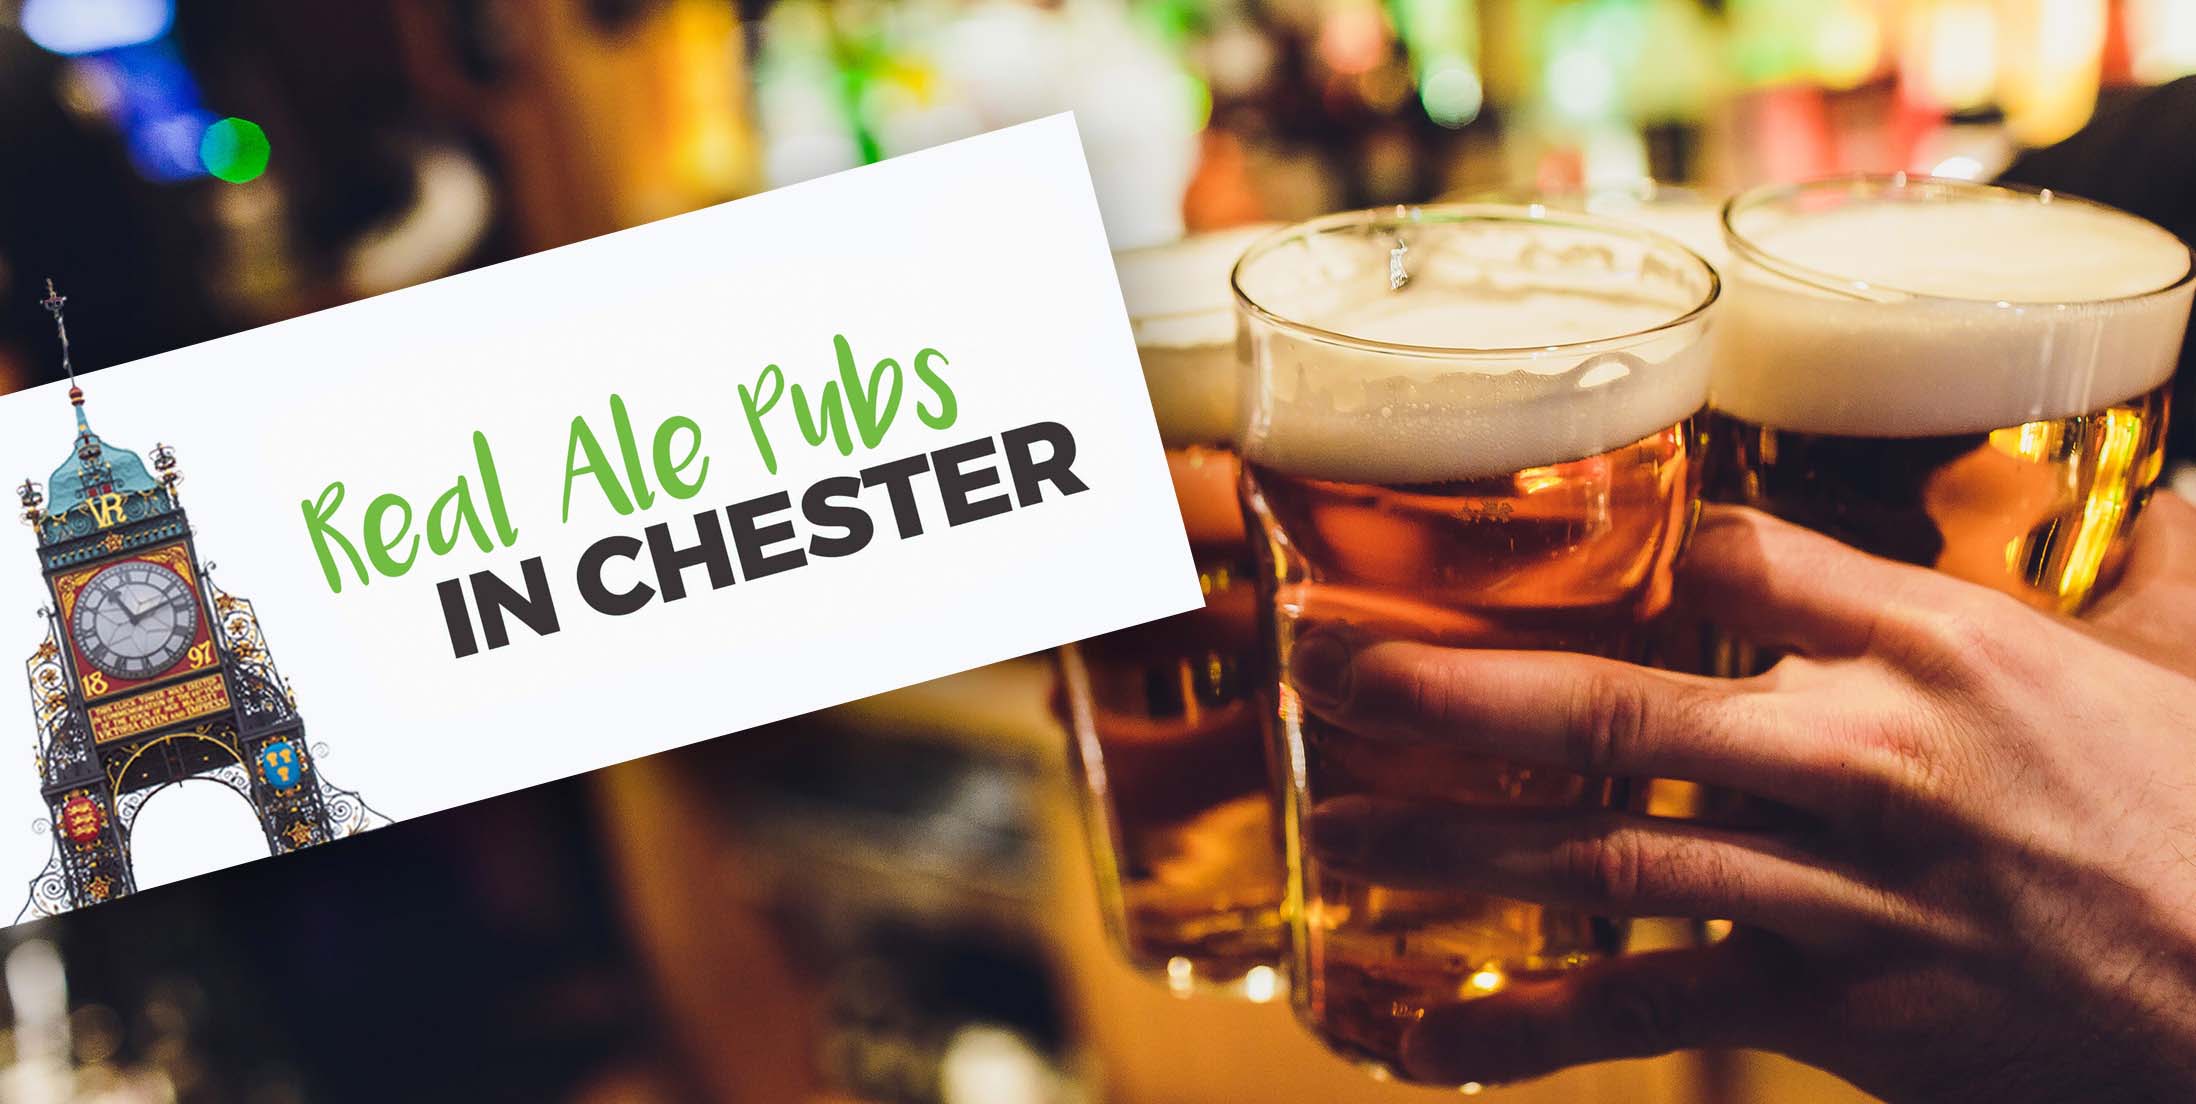 Real Ale Pubs in Chester